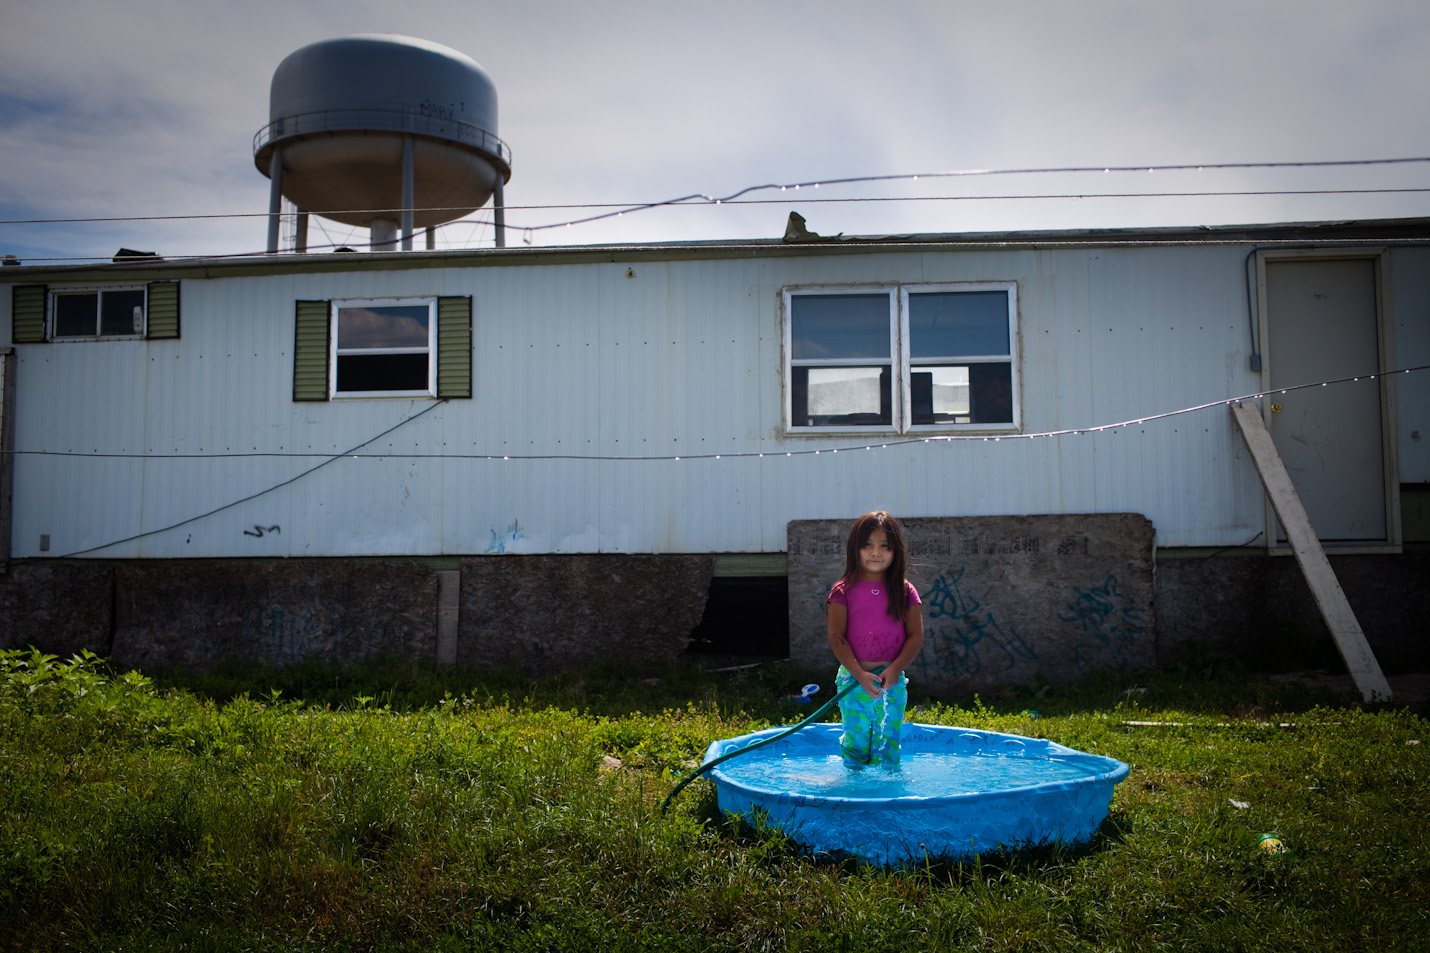 A young girl stands in front of her trailor in Pine Ridge, South Dakota.  Pine Ridge Reservation, located in Shannon County, is considered the poorest county in the United States.  Gang violence, unemployment, and alcoholism are major problems throughout the reservation. 